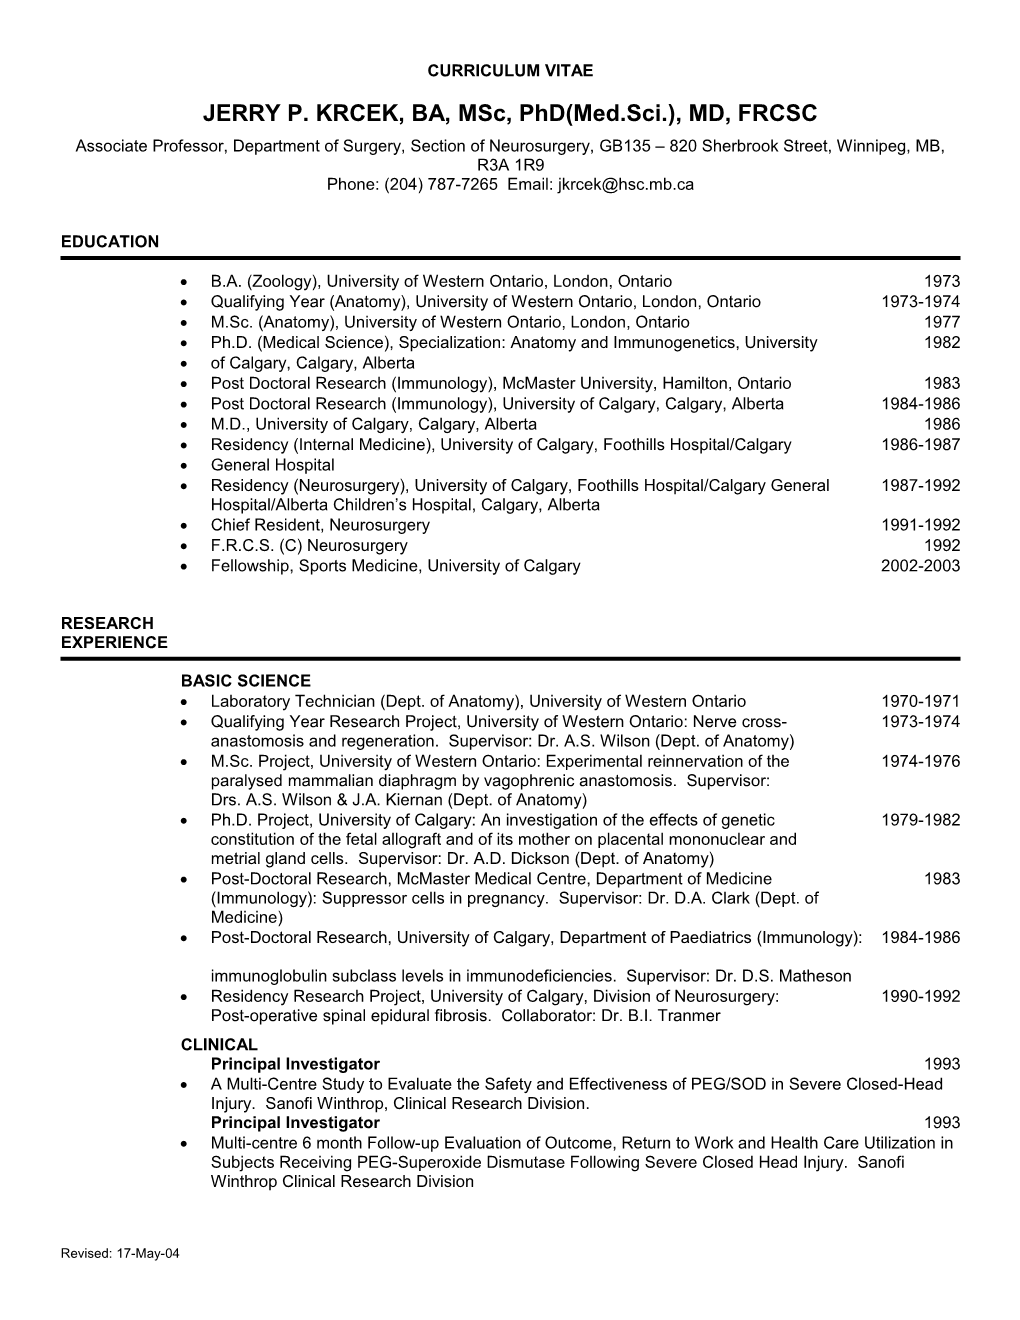 Curriculum Vitae of Jerry P. Krcek Page 8 of 8